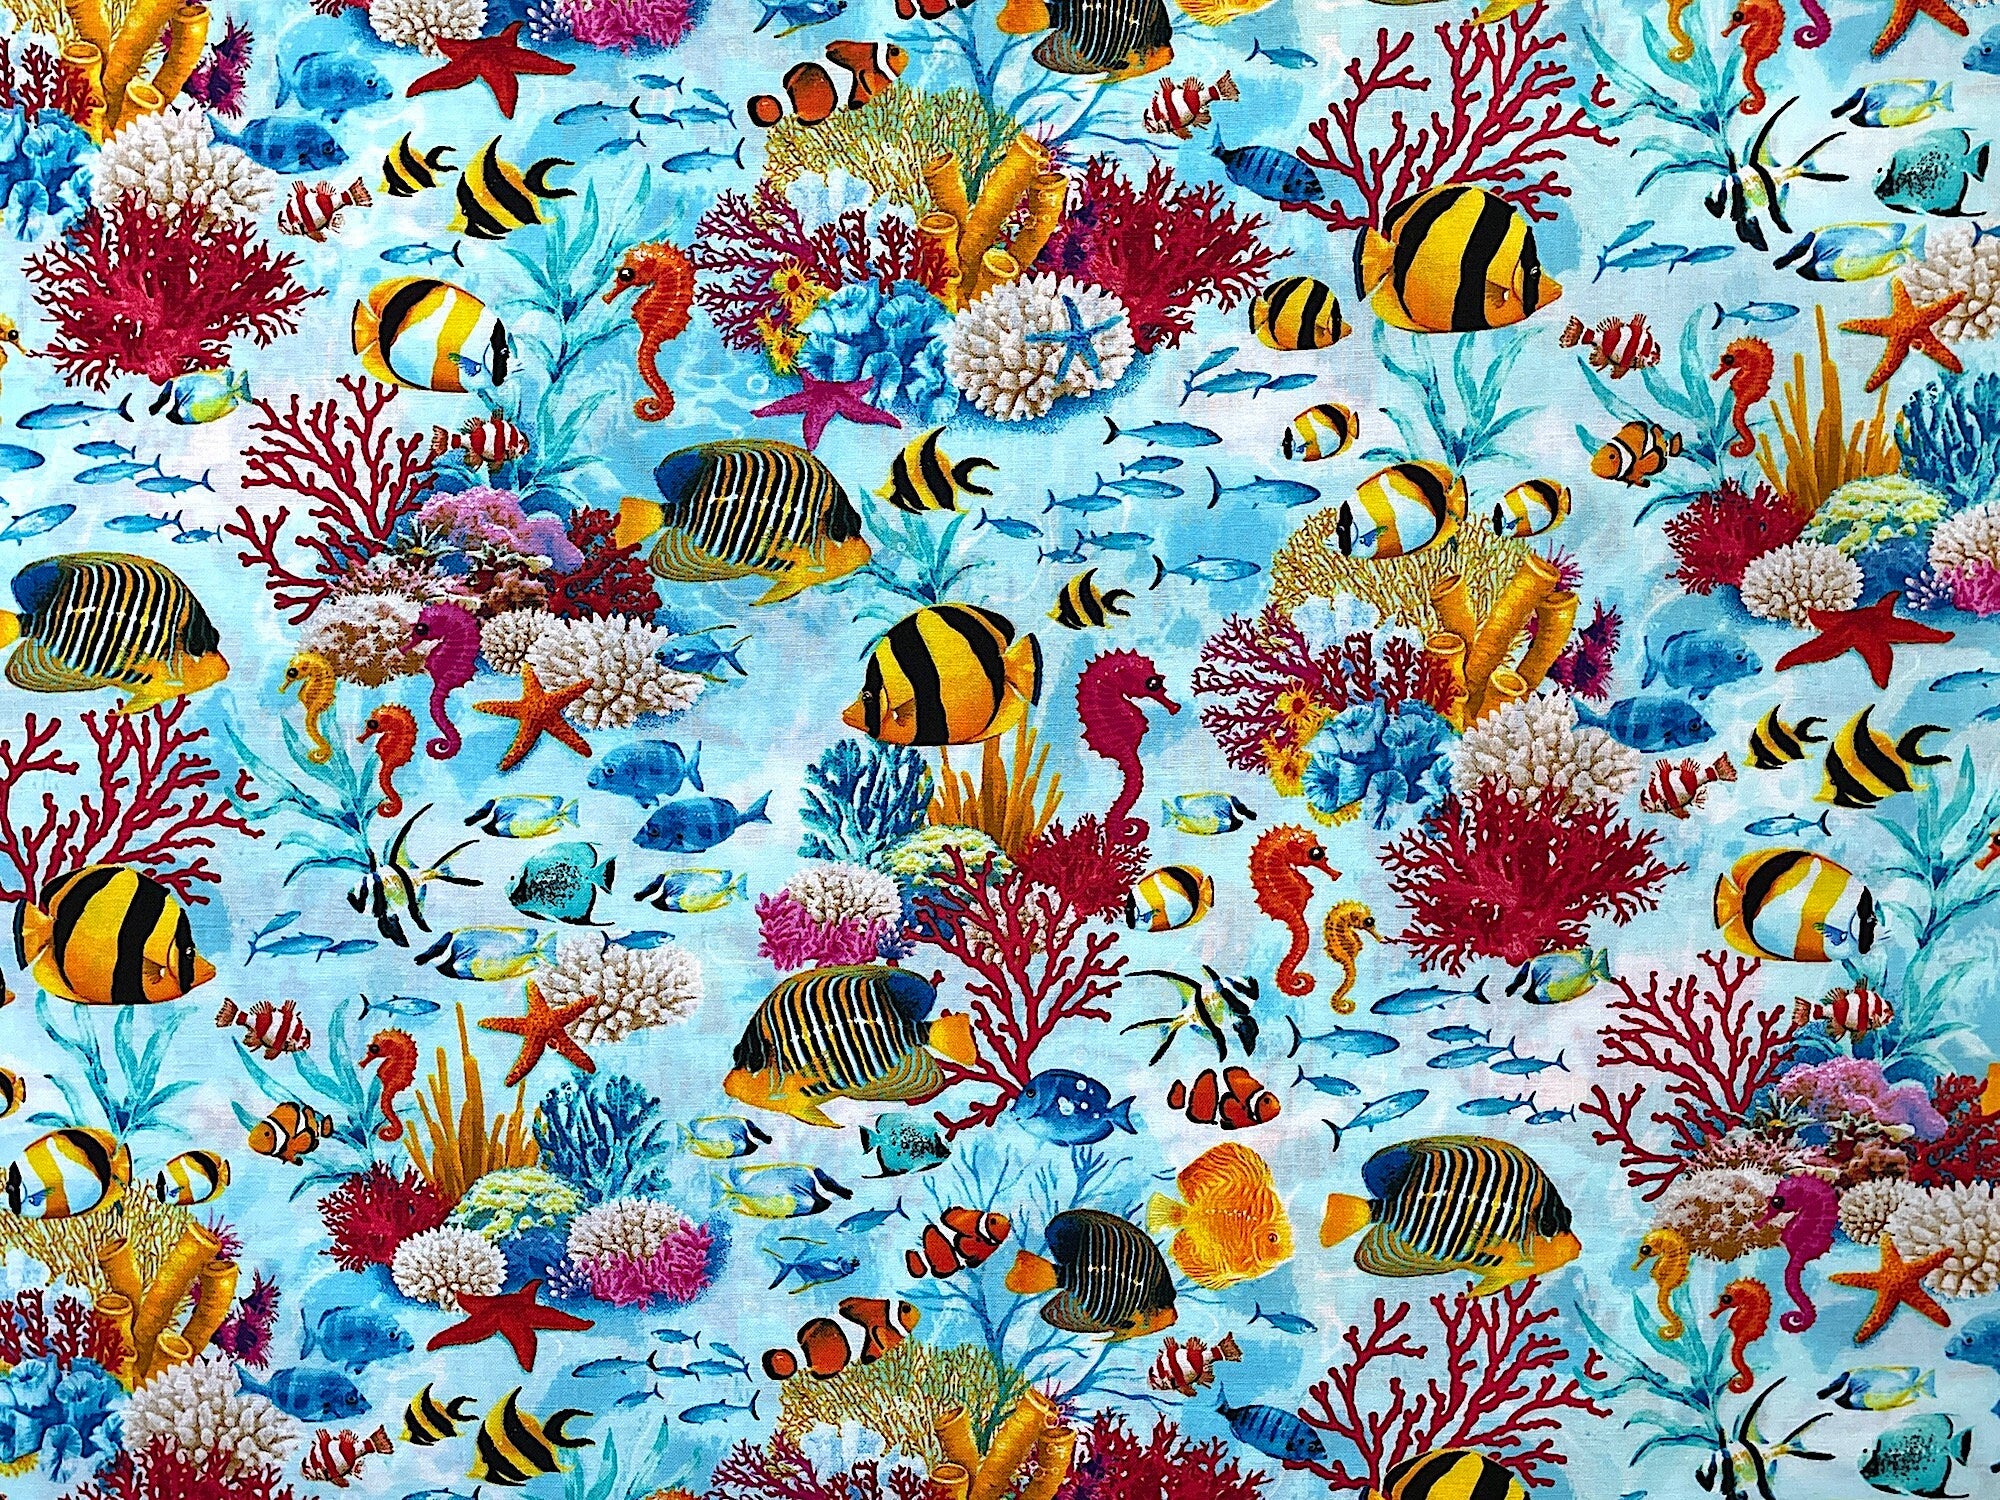 This fish fabric is called Under the Sea Creatures and is covered with fish, sea horses, coral, saltwater plants and starfish. The fish are yellow, black, blue, black and turquoise.